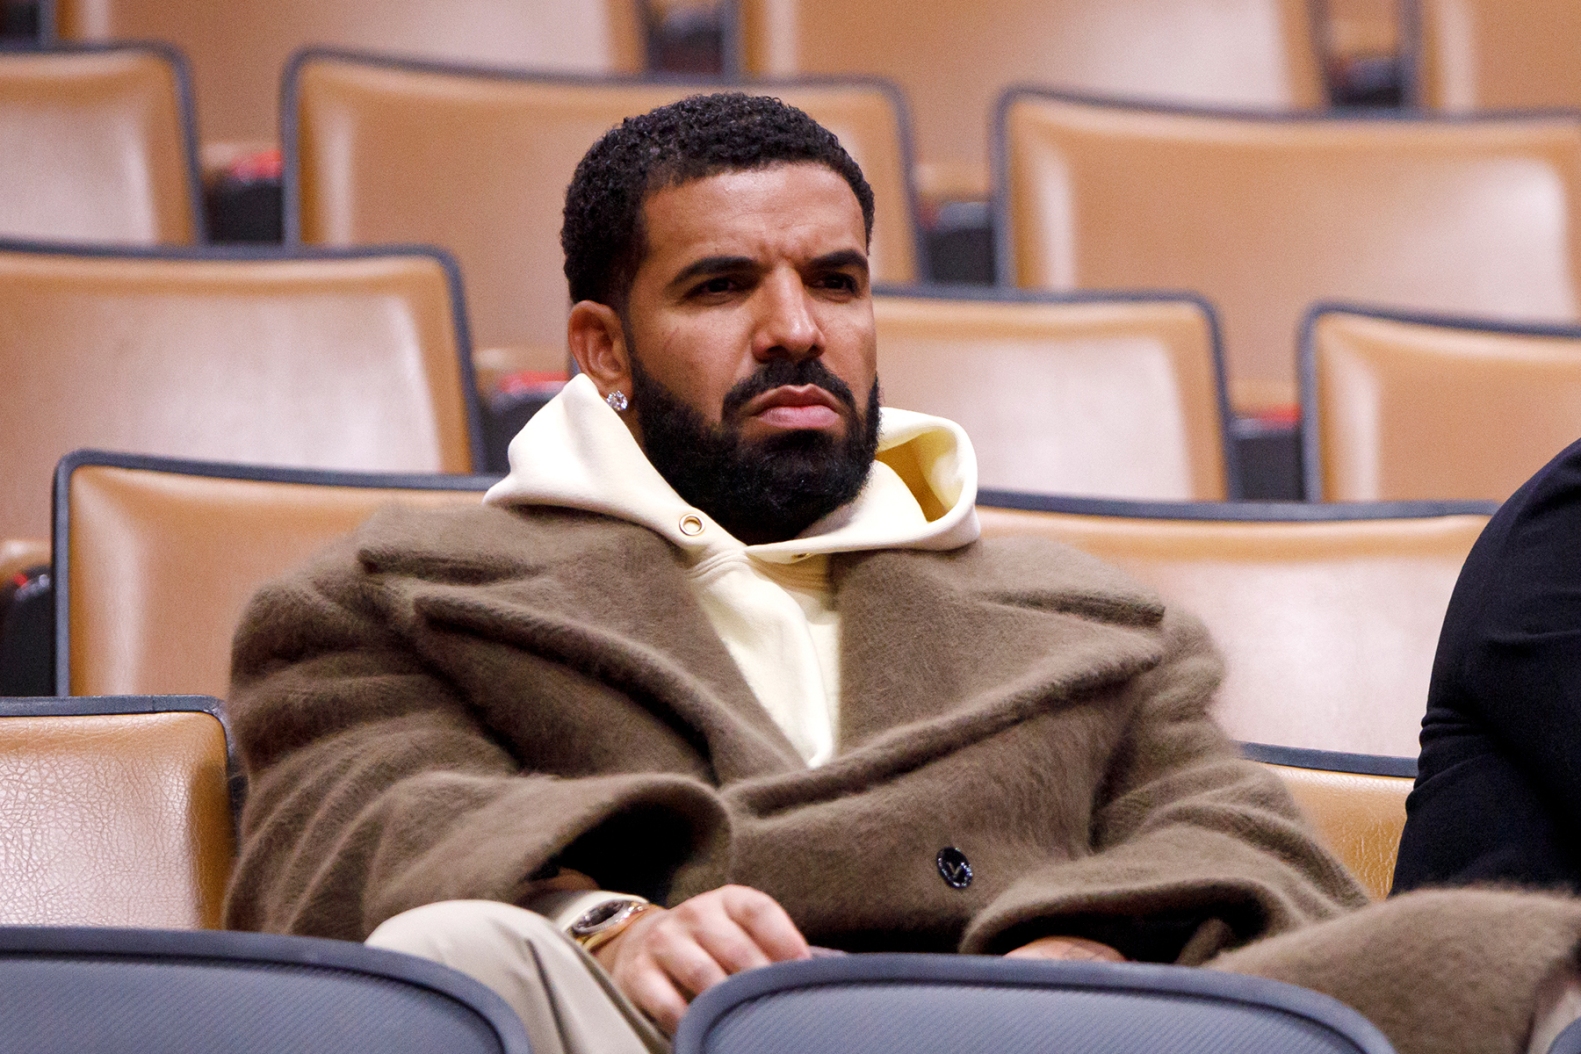 Fans Anticipate Awkward Yet Entertaining Interview Between Drake and